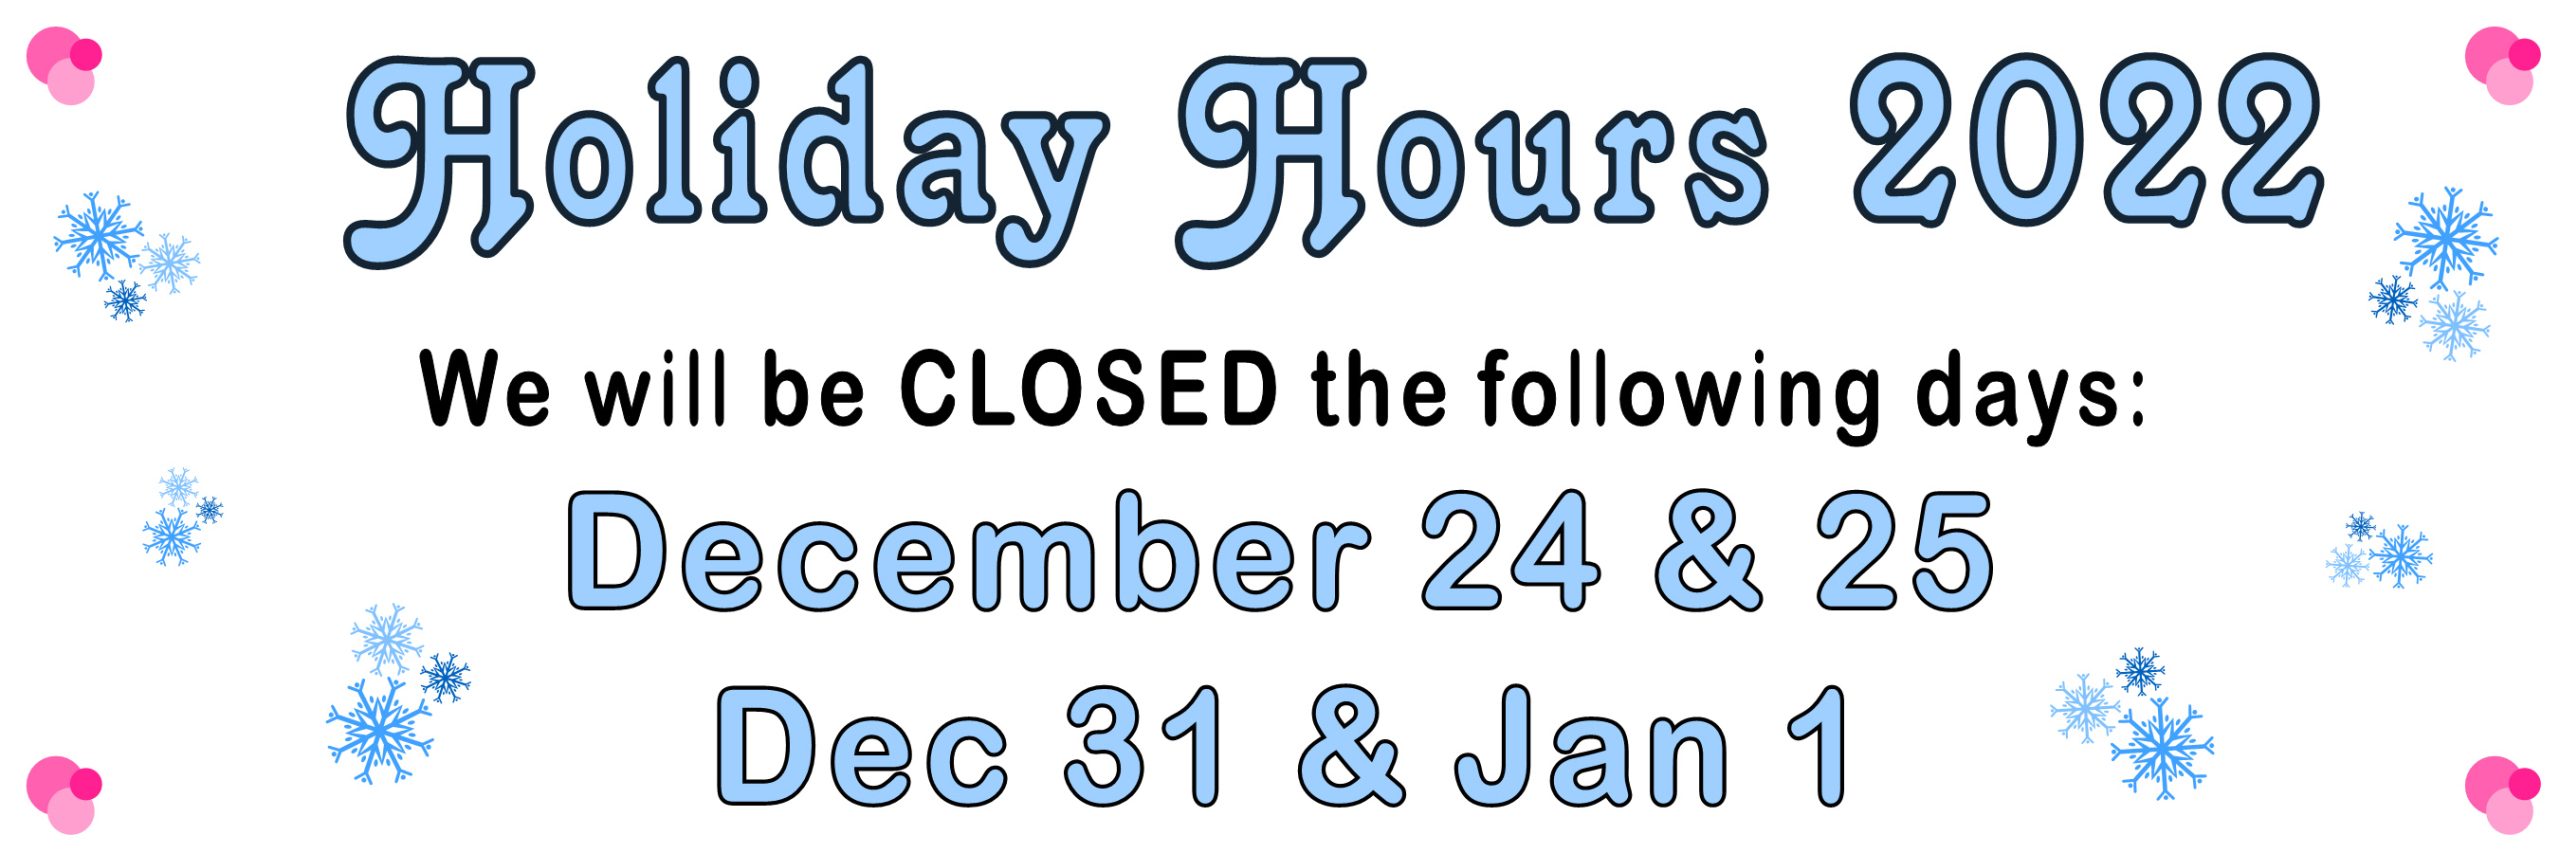 web banner holiday hours 2022